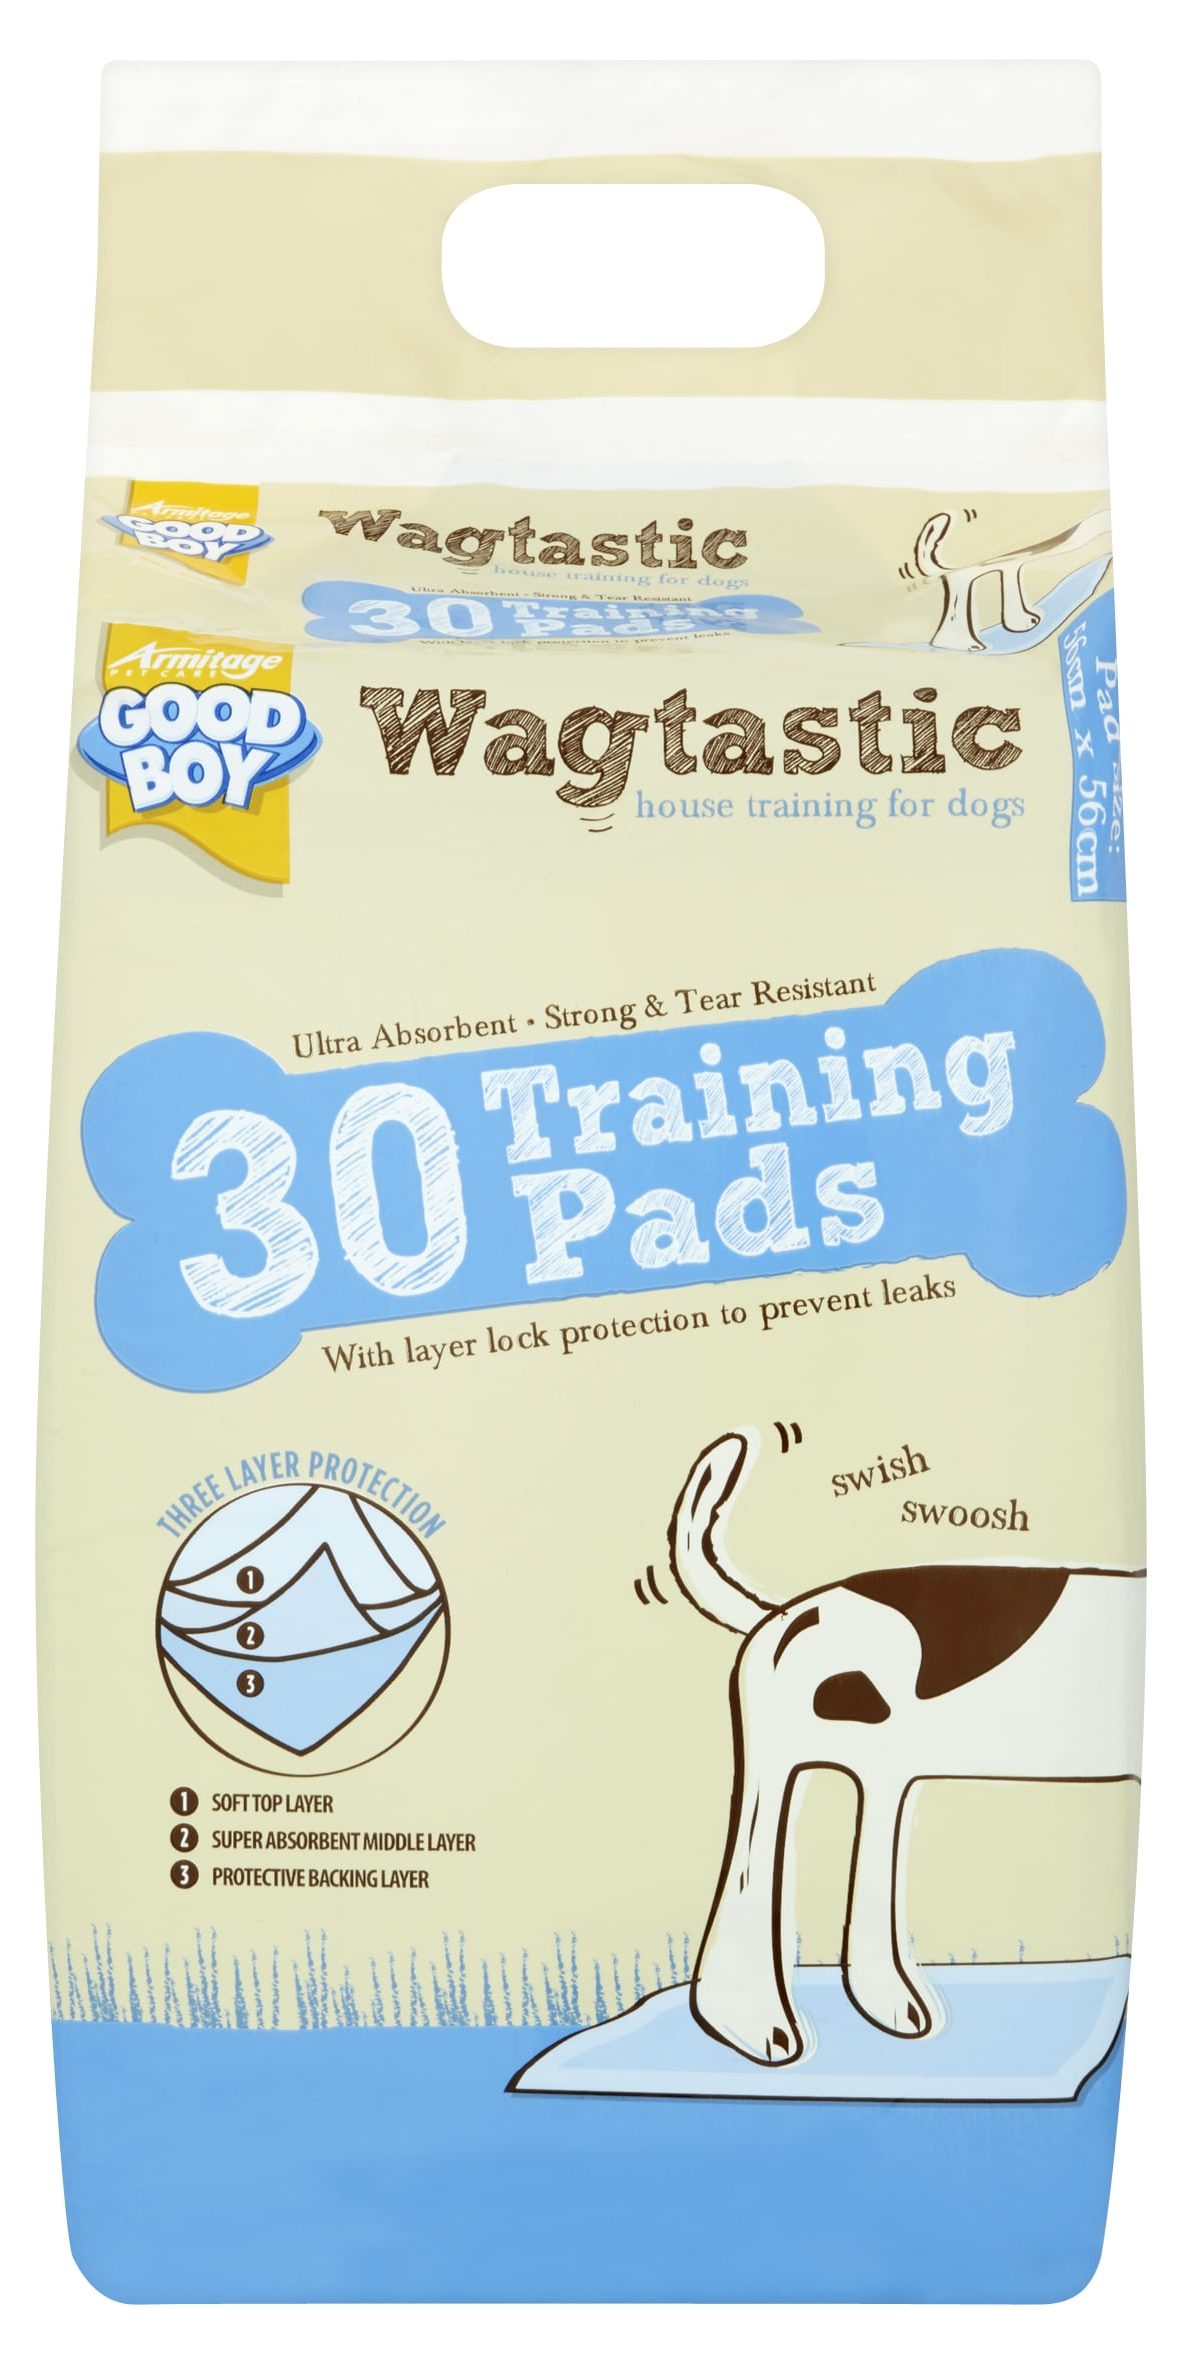 morrisons puppy training pads